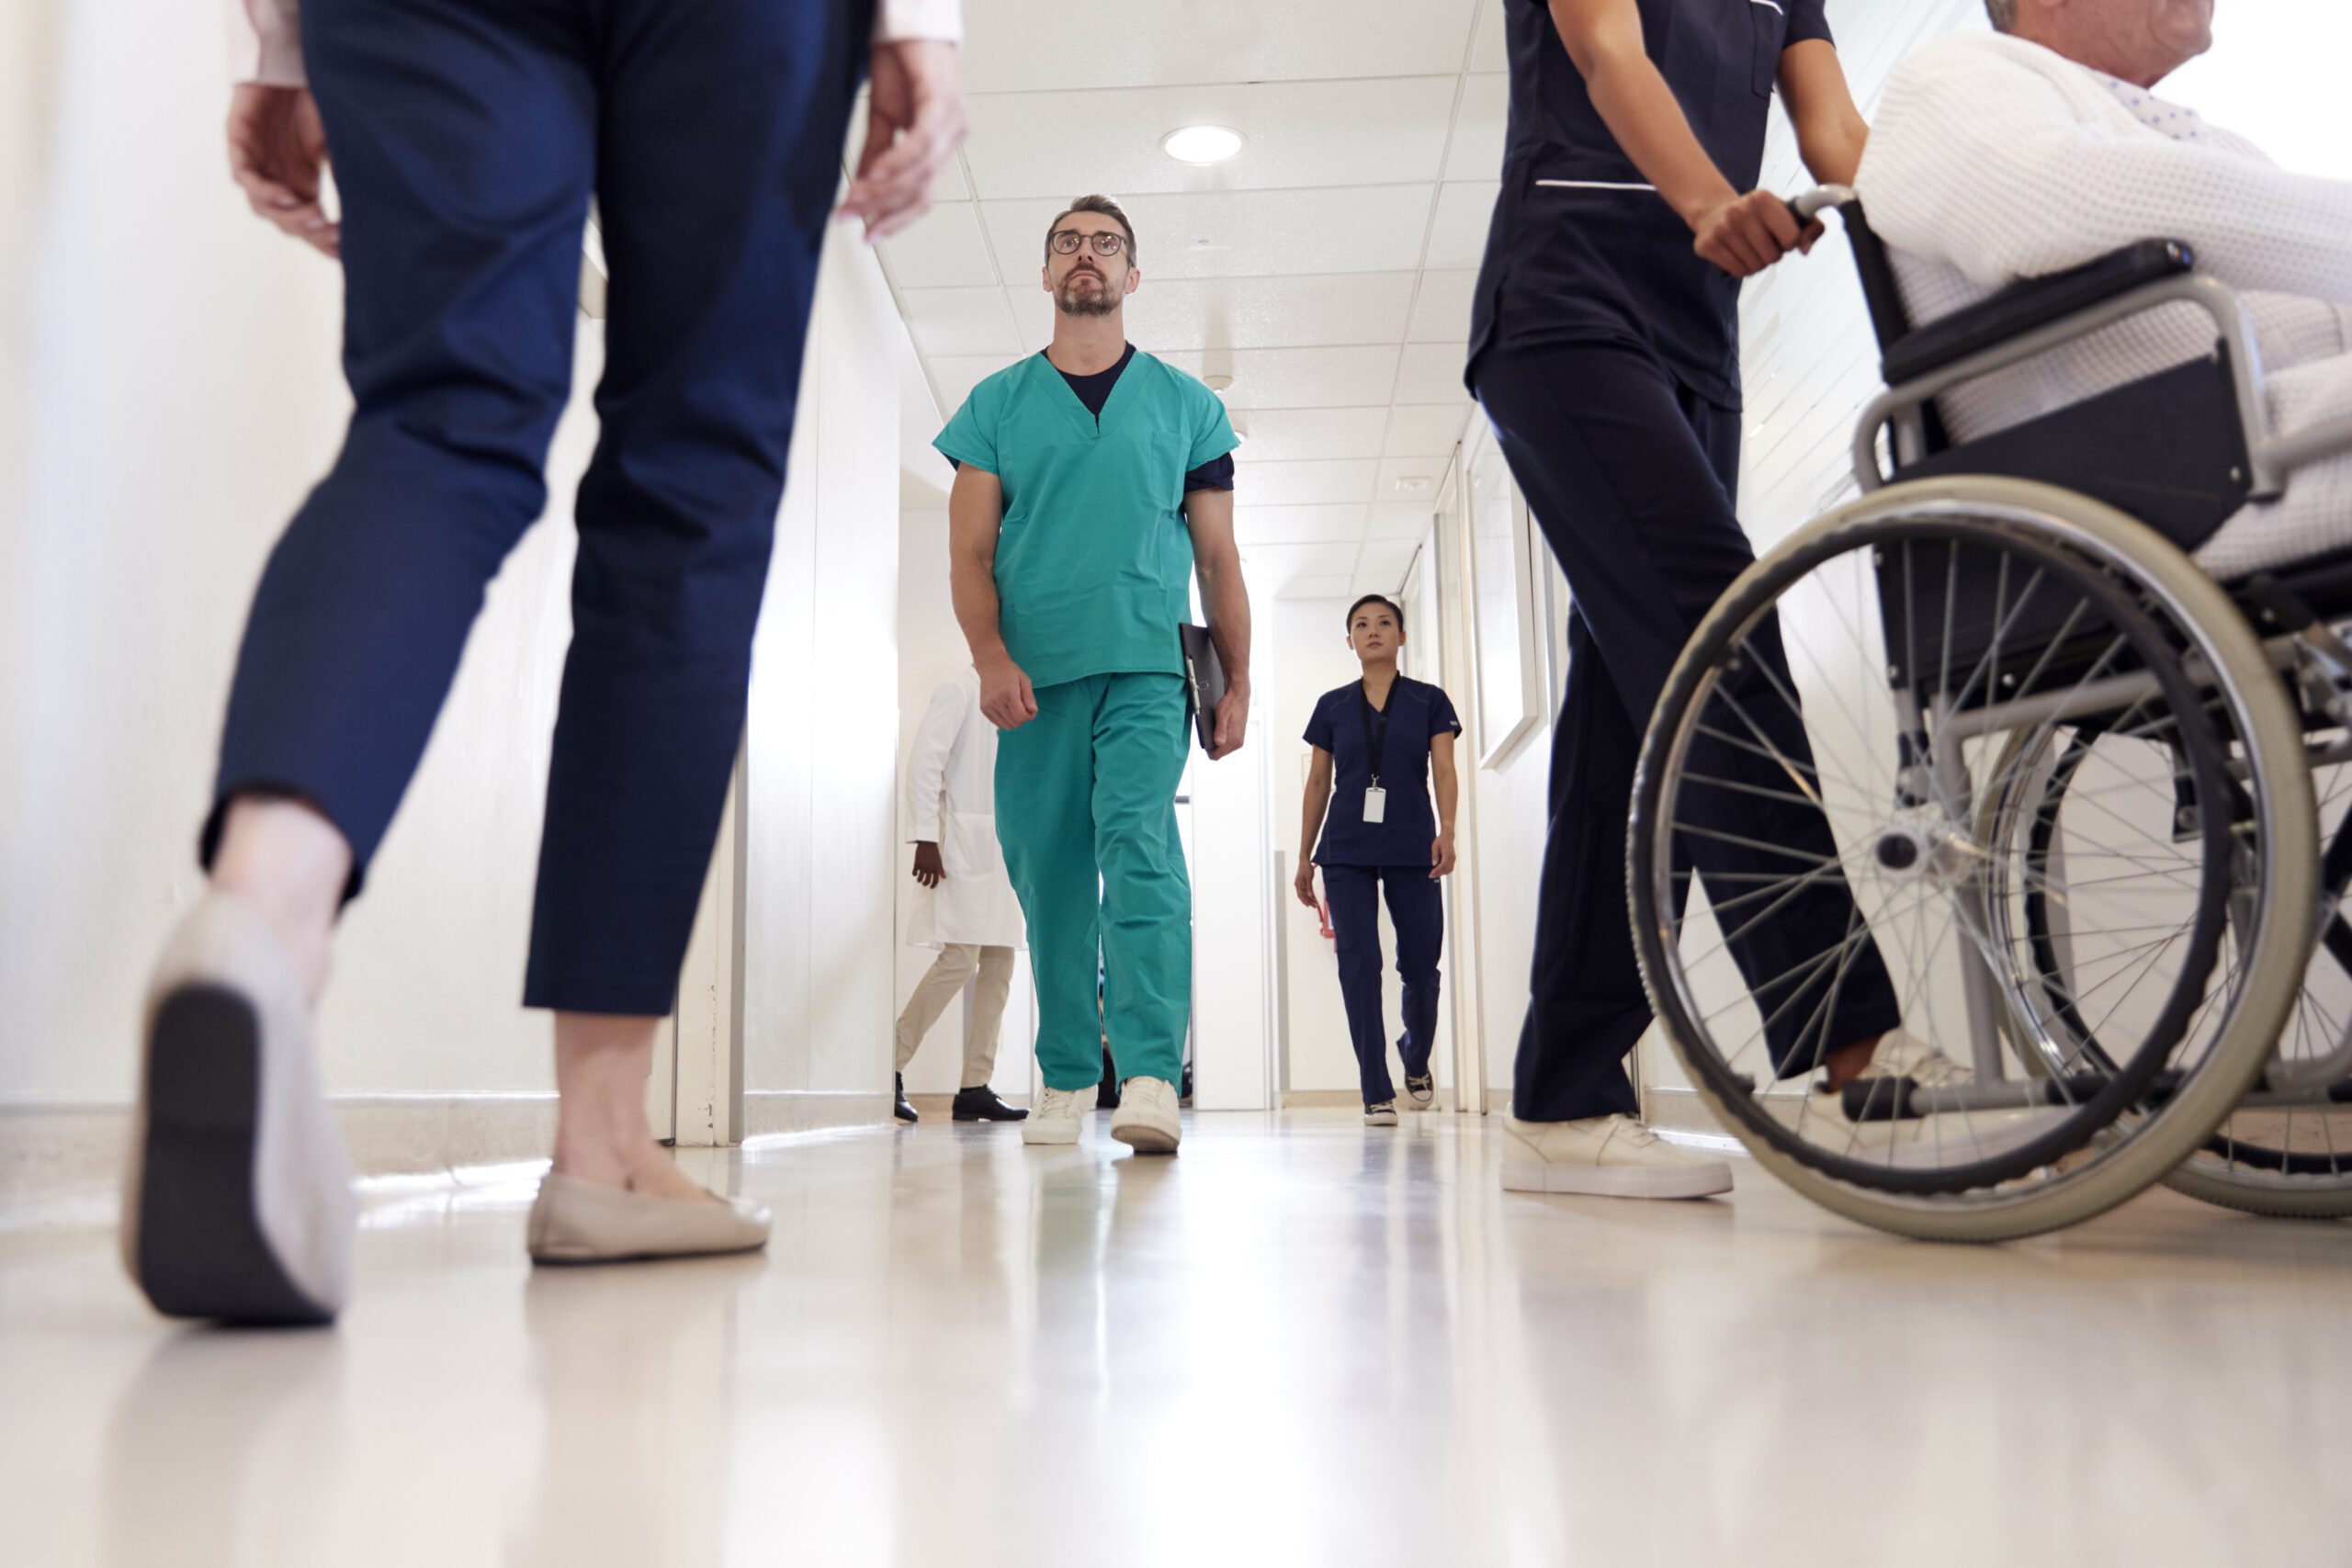 Busy Hospital Corridor With Medical Staff And Patients